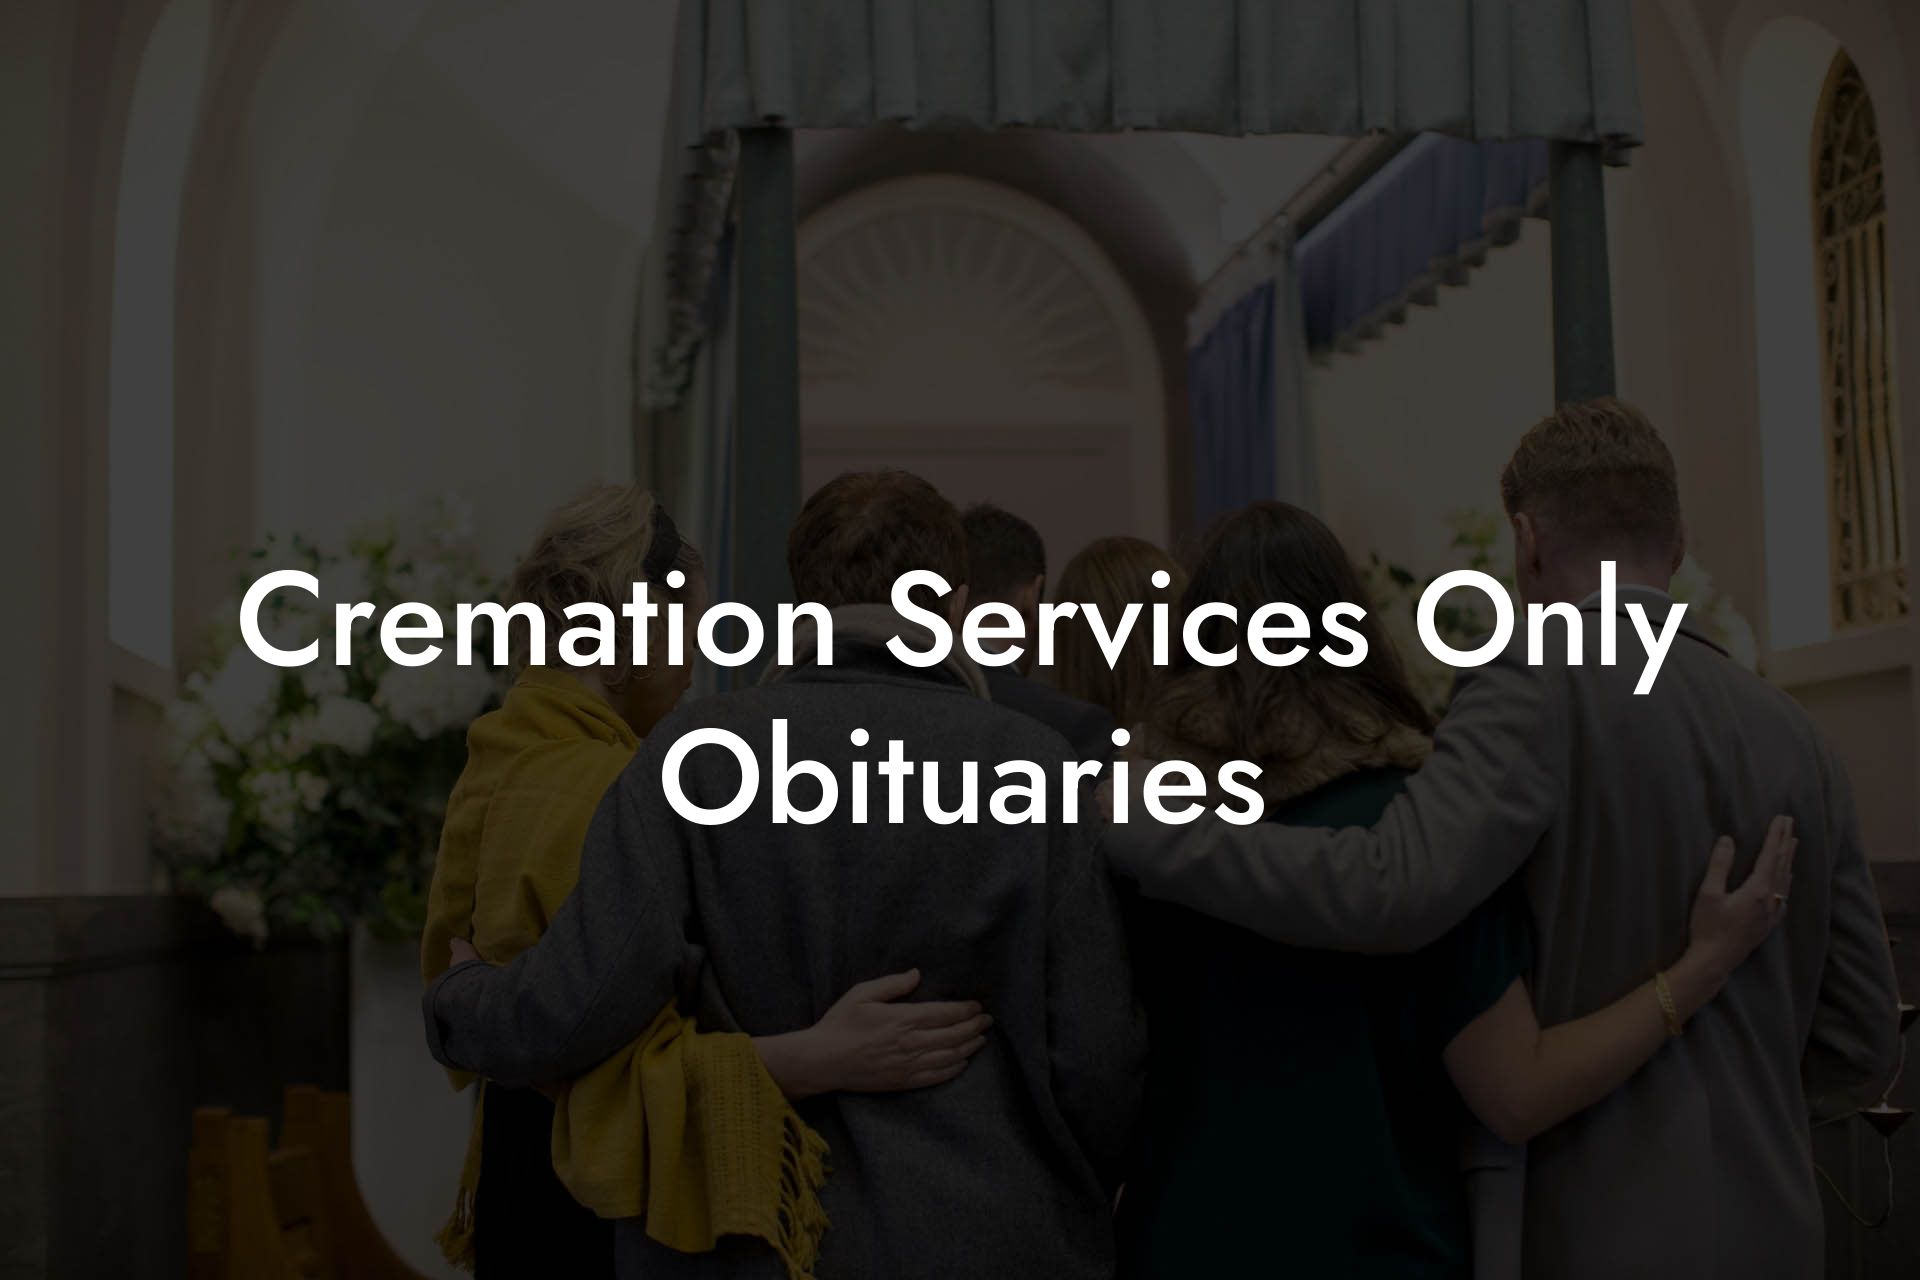 Cremation Services Only Obituaries